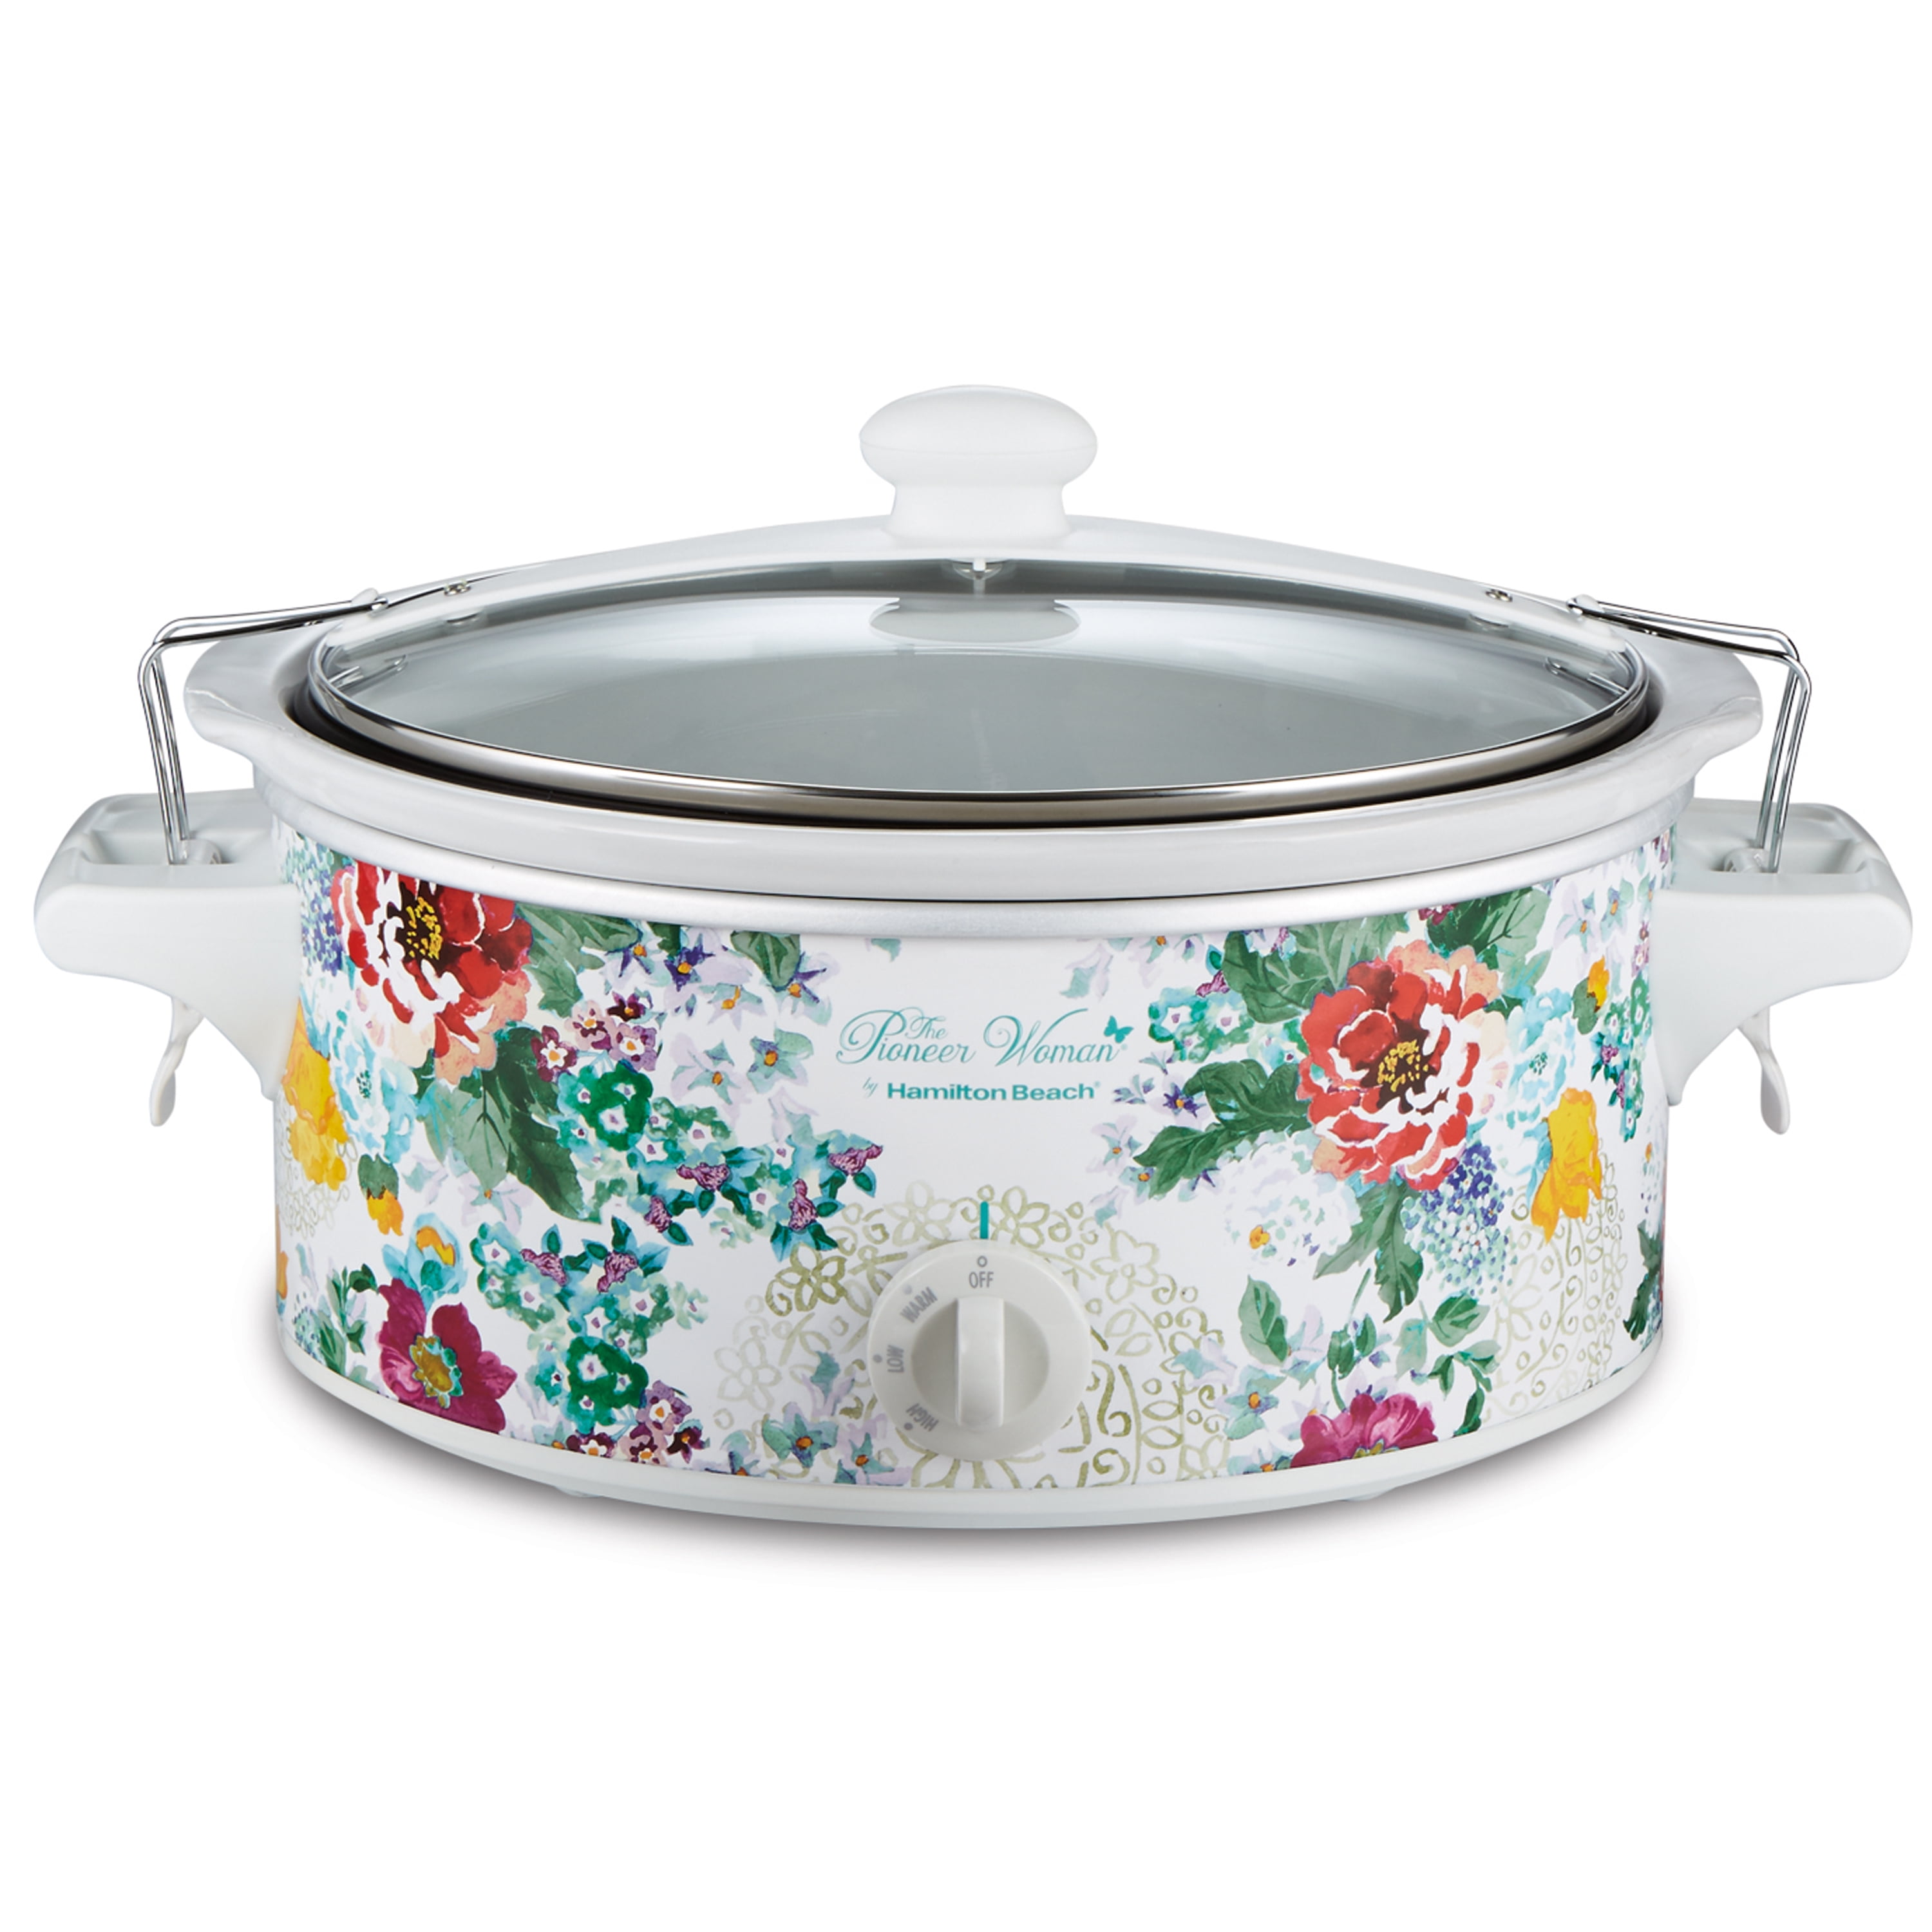 The Pioneer Woman Country Garden 6-Quart Portable Slow Cooker